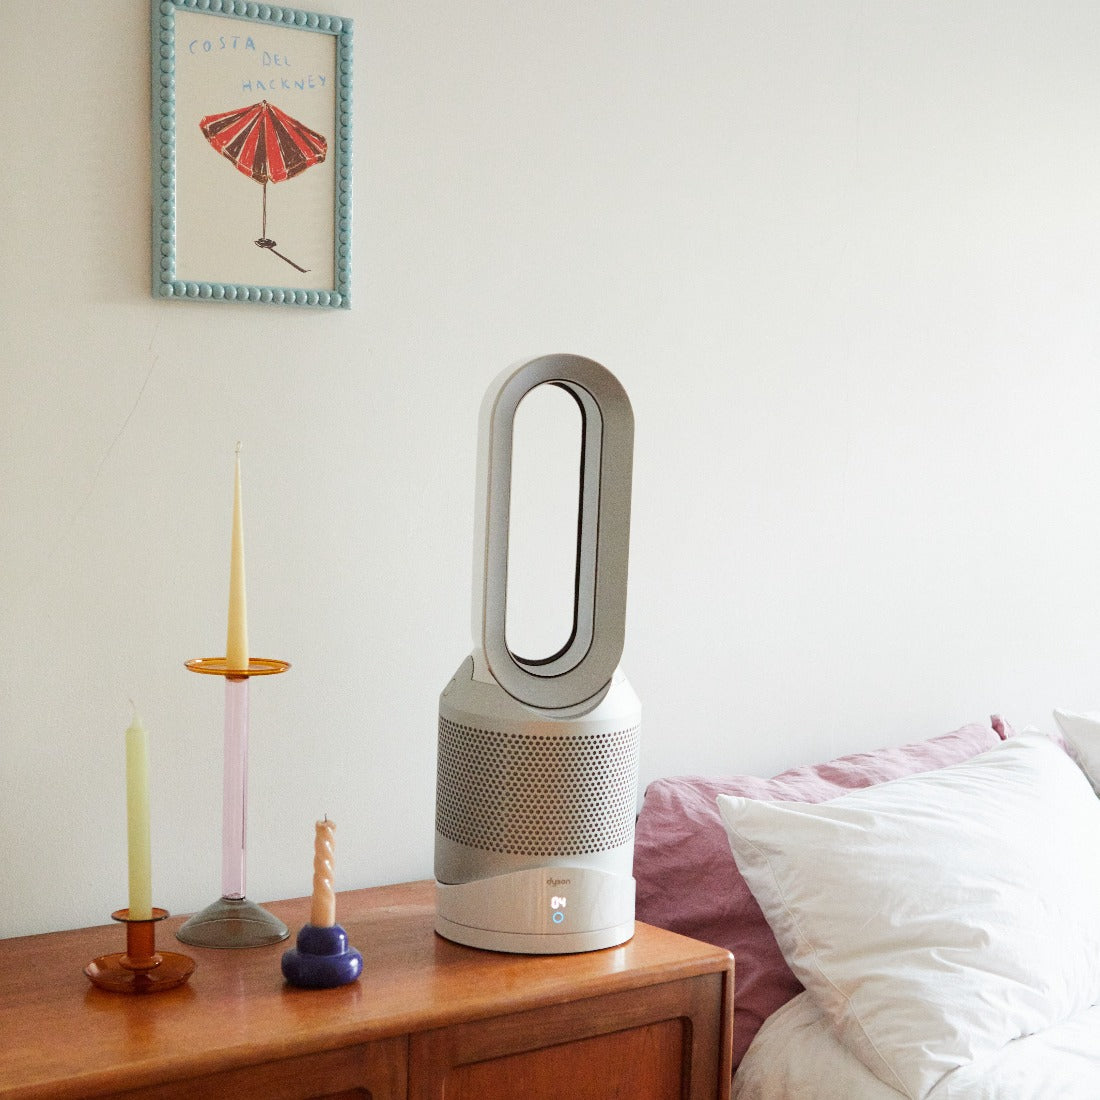 On Loon - Rent Dyson Pure Hot+Cool™ for Dreamy Sleep